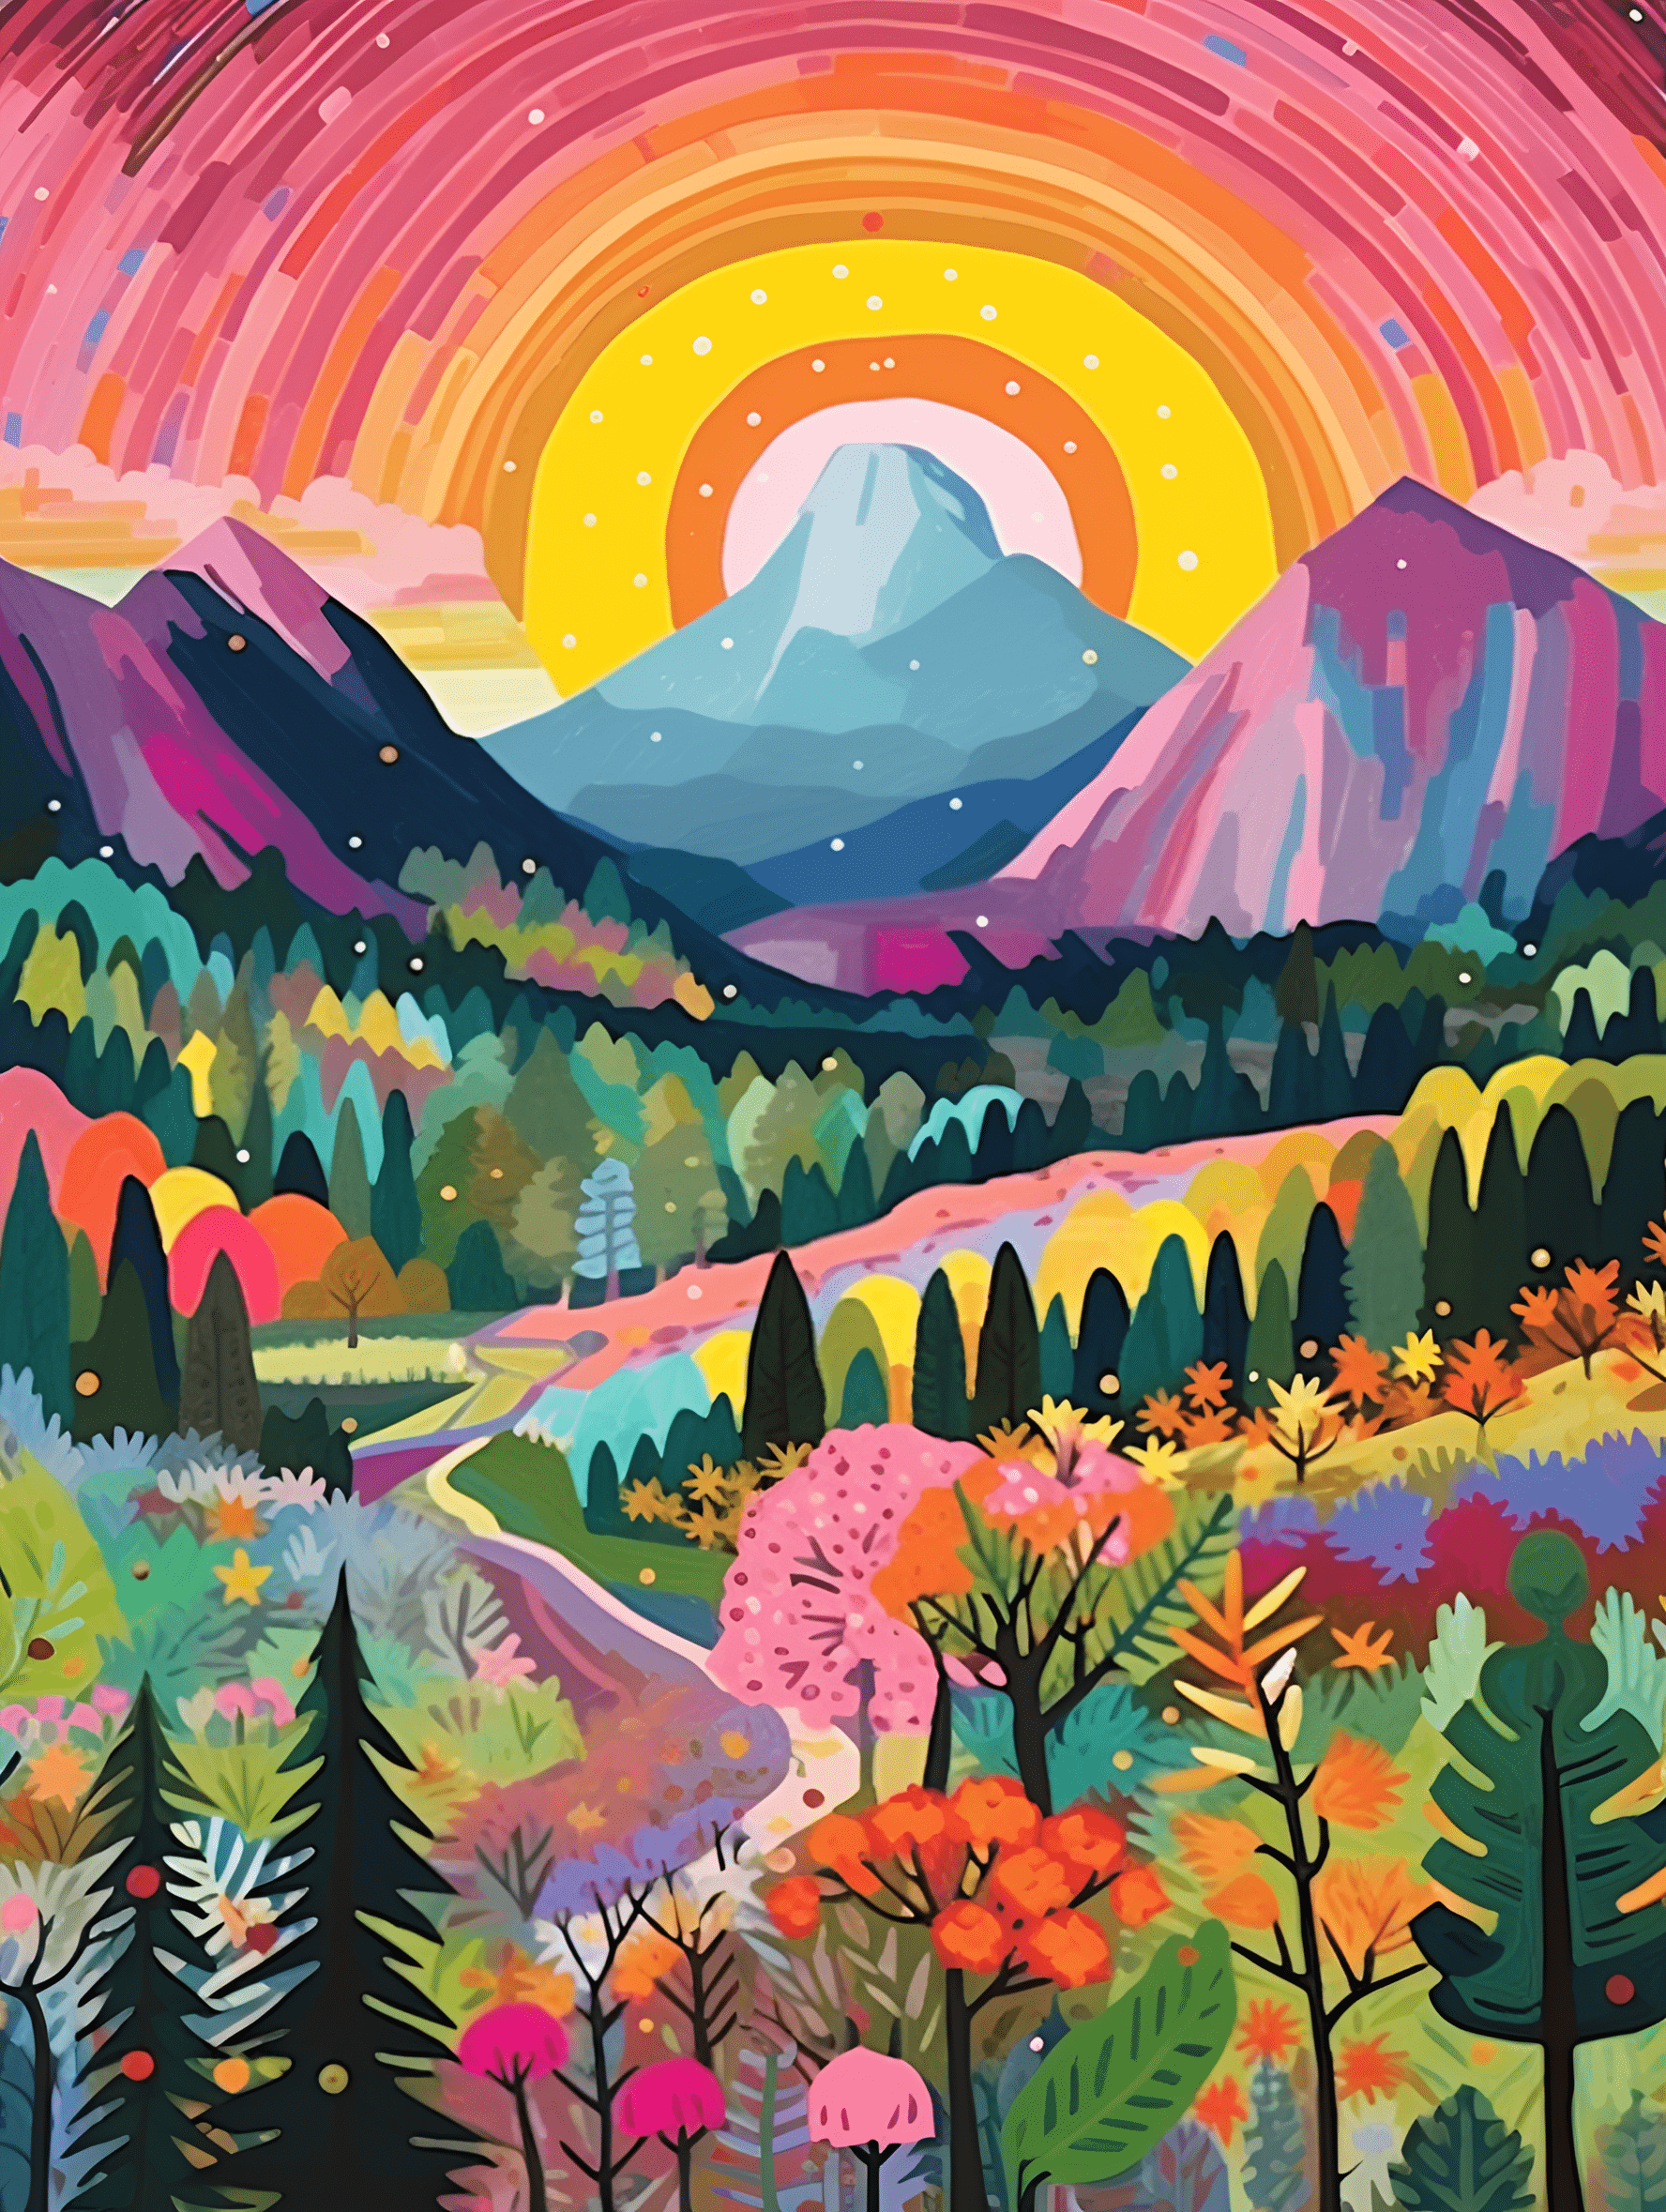 【New Year Sale】 Colorful Yosemite Series by ColourMost™ #06 - 'Glow' |  Original Paint by Numbers